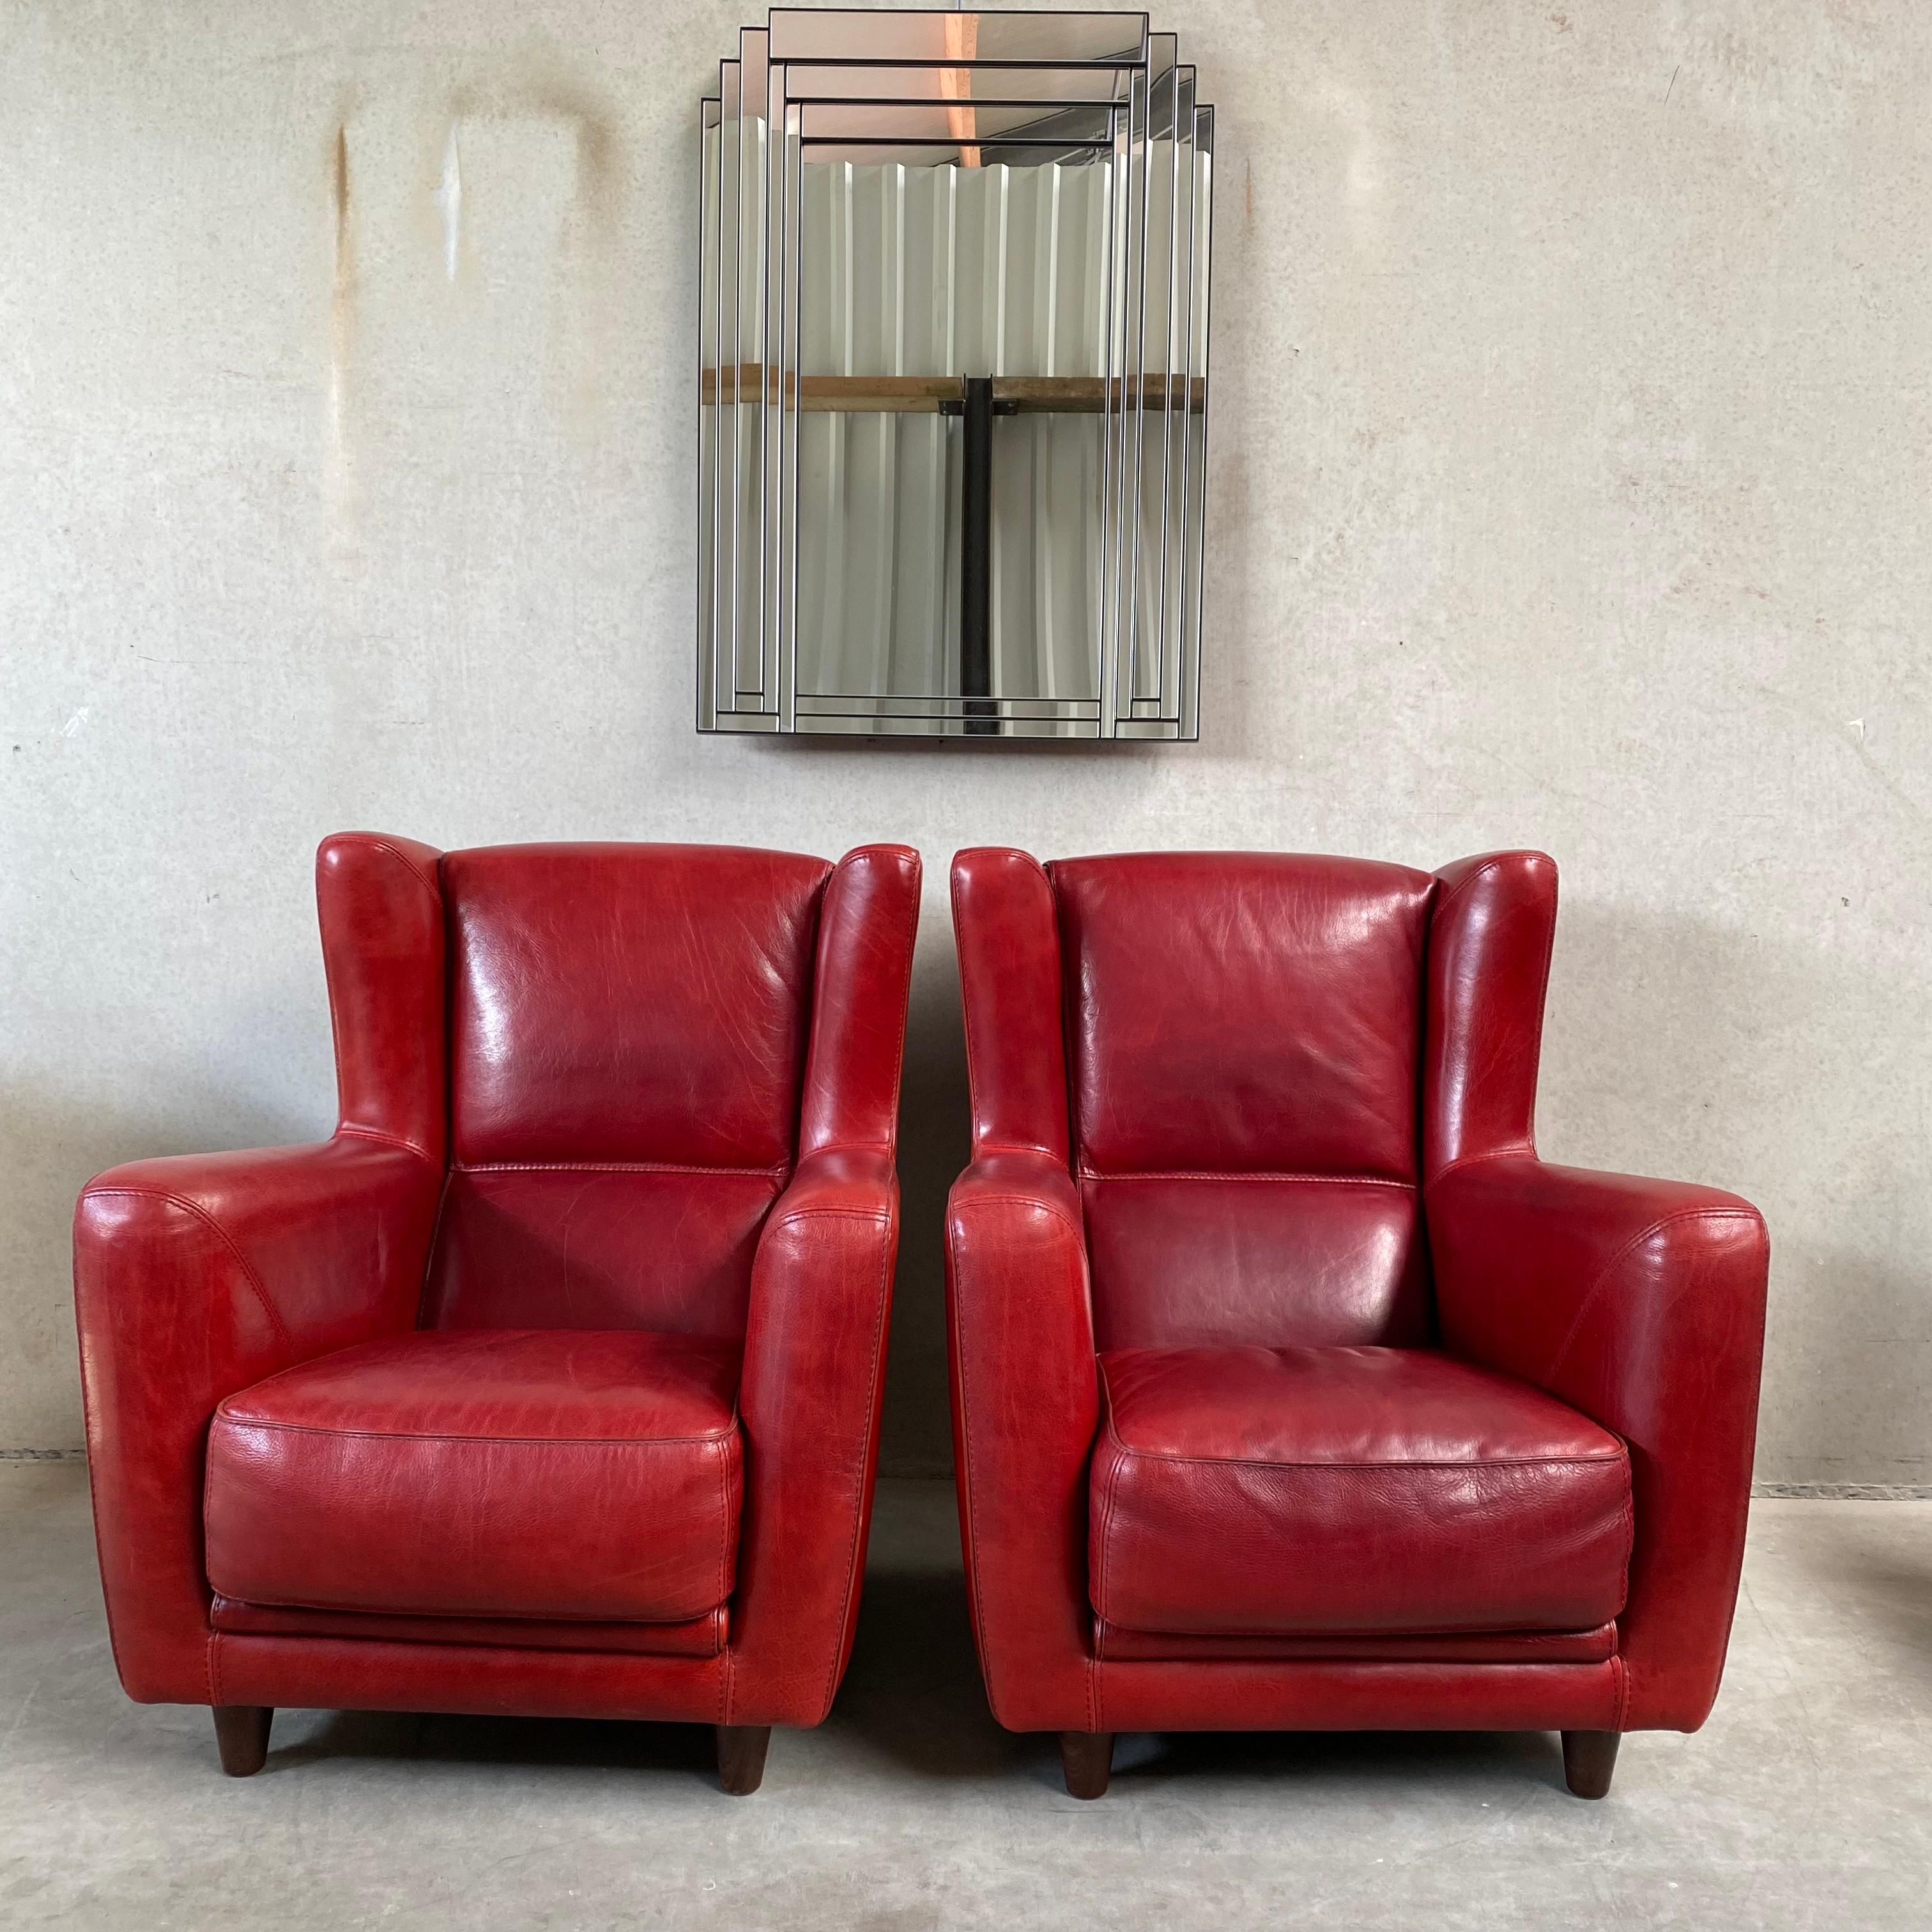 Italian Pair of Ox-Blood Red Leather Lounge Chairs Begére by Baxter Italy 90s For Sale